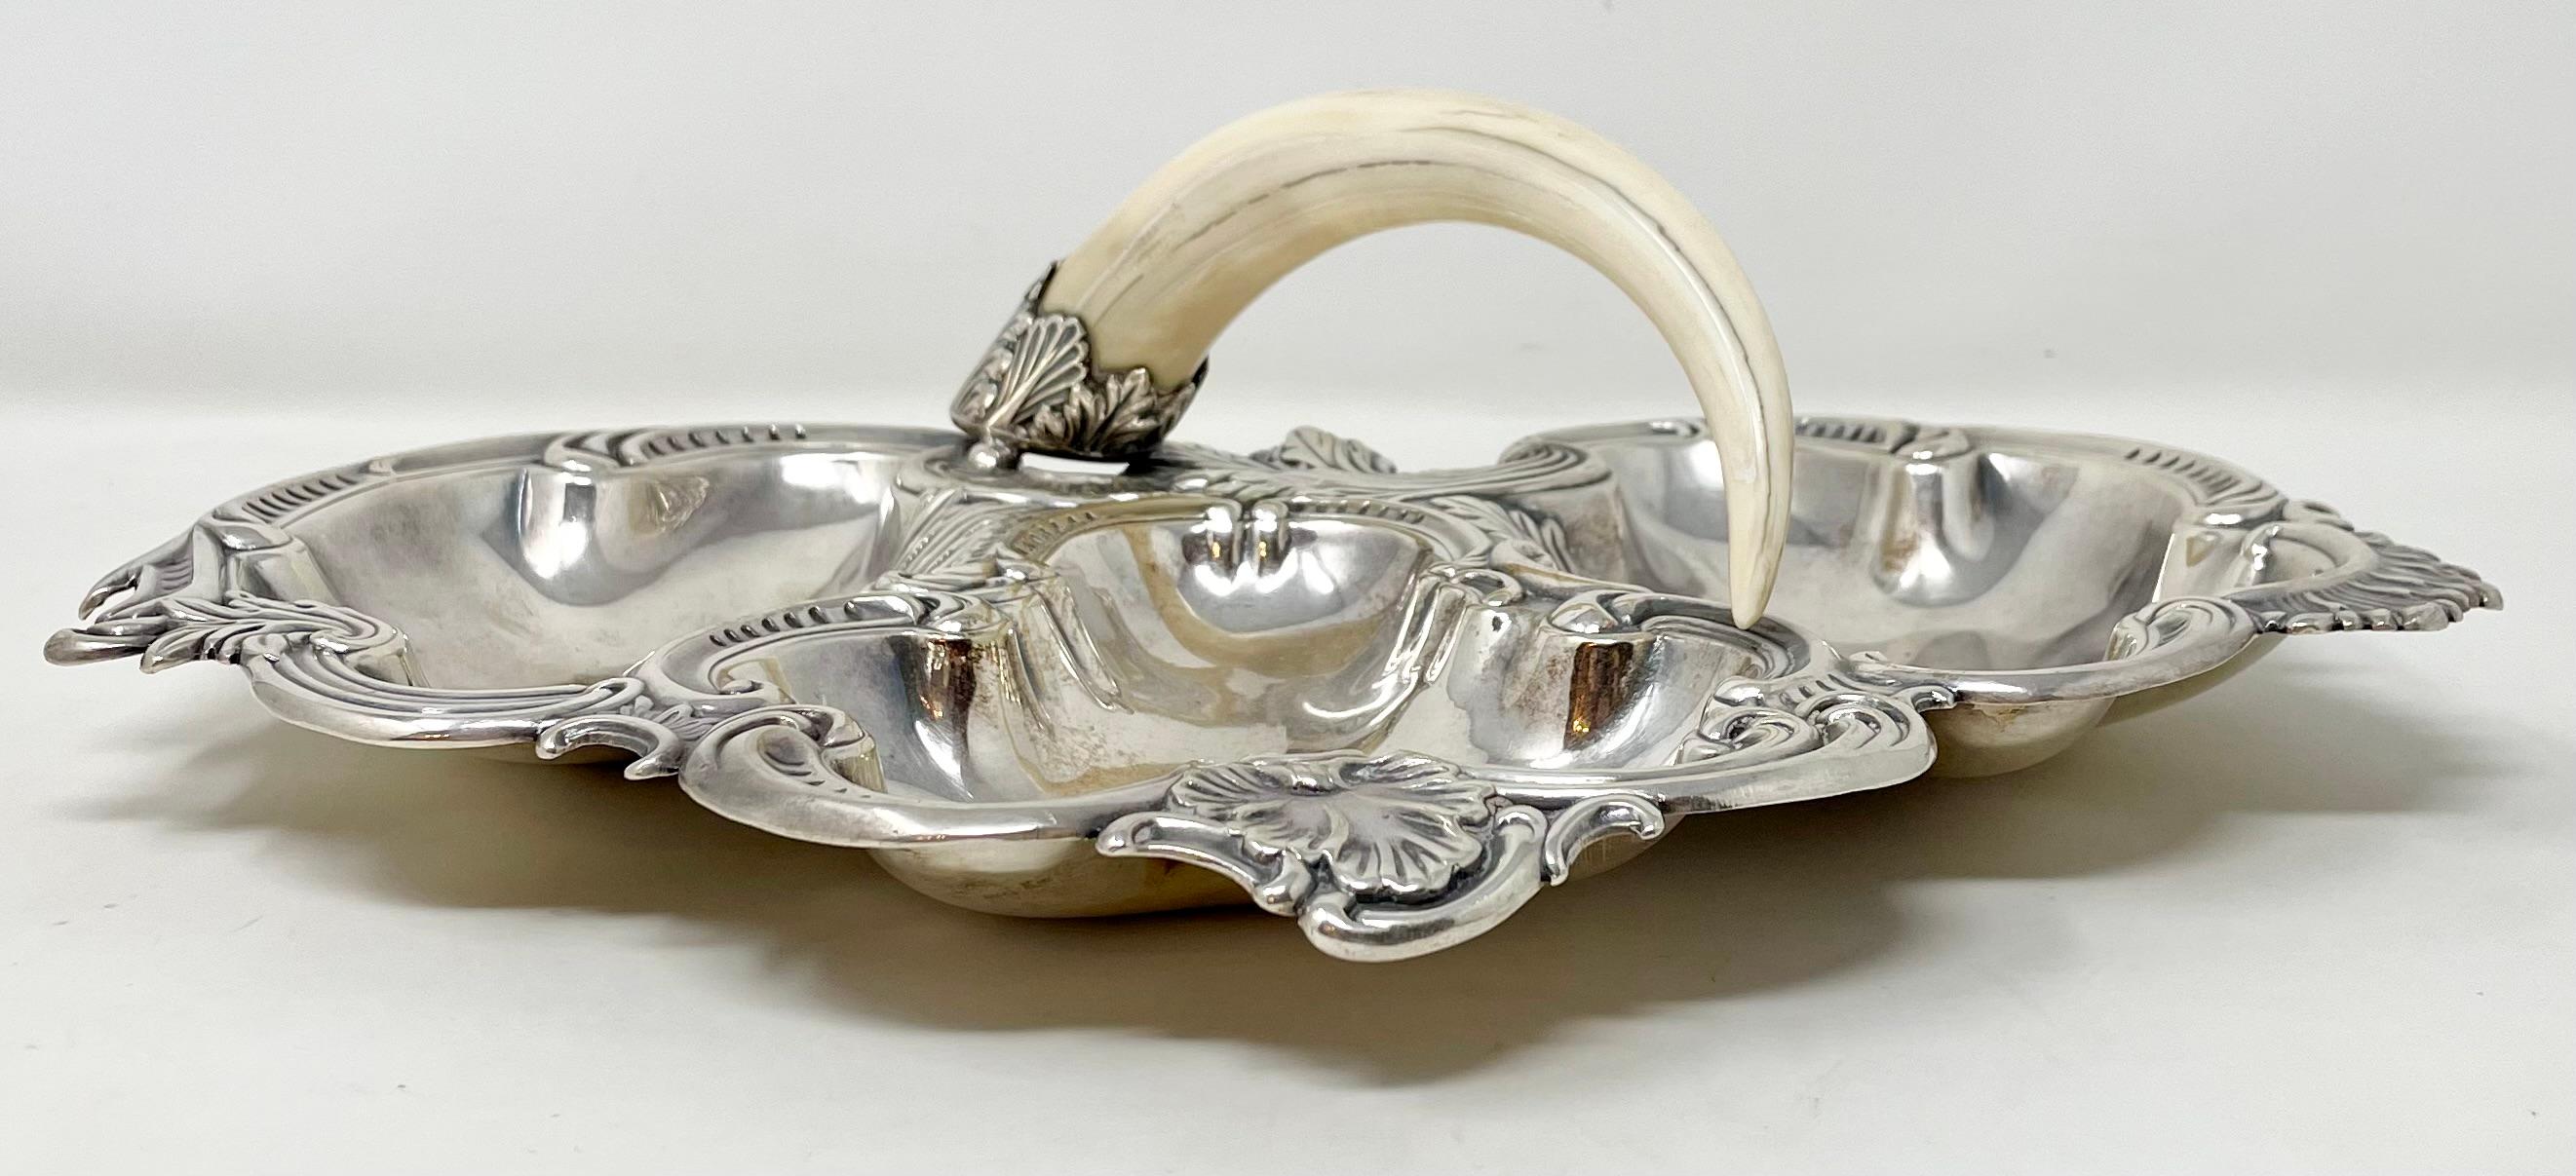 Antique English Sheffield silver-plate and boar's tusk serving dish, circa 1890-1910.